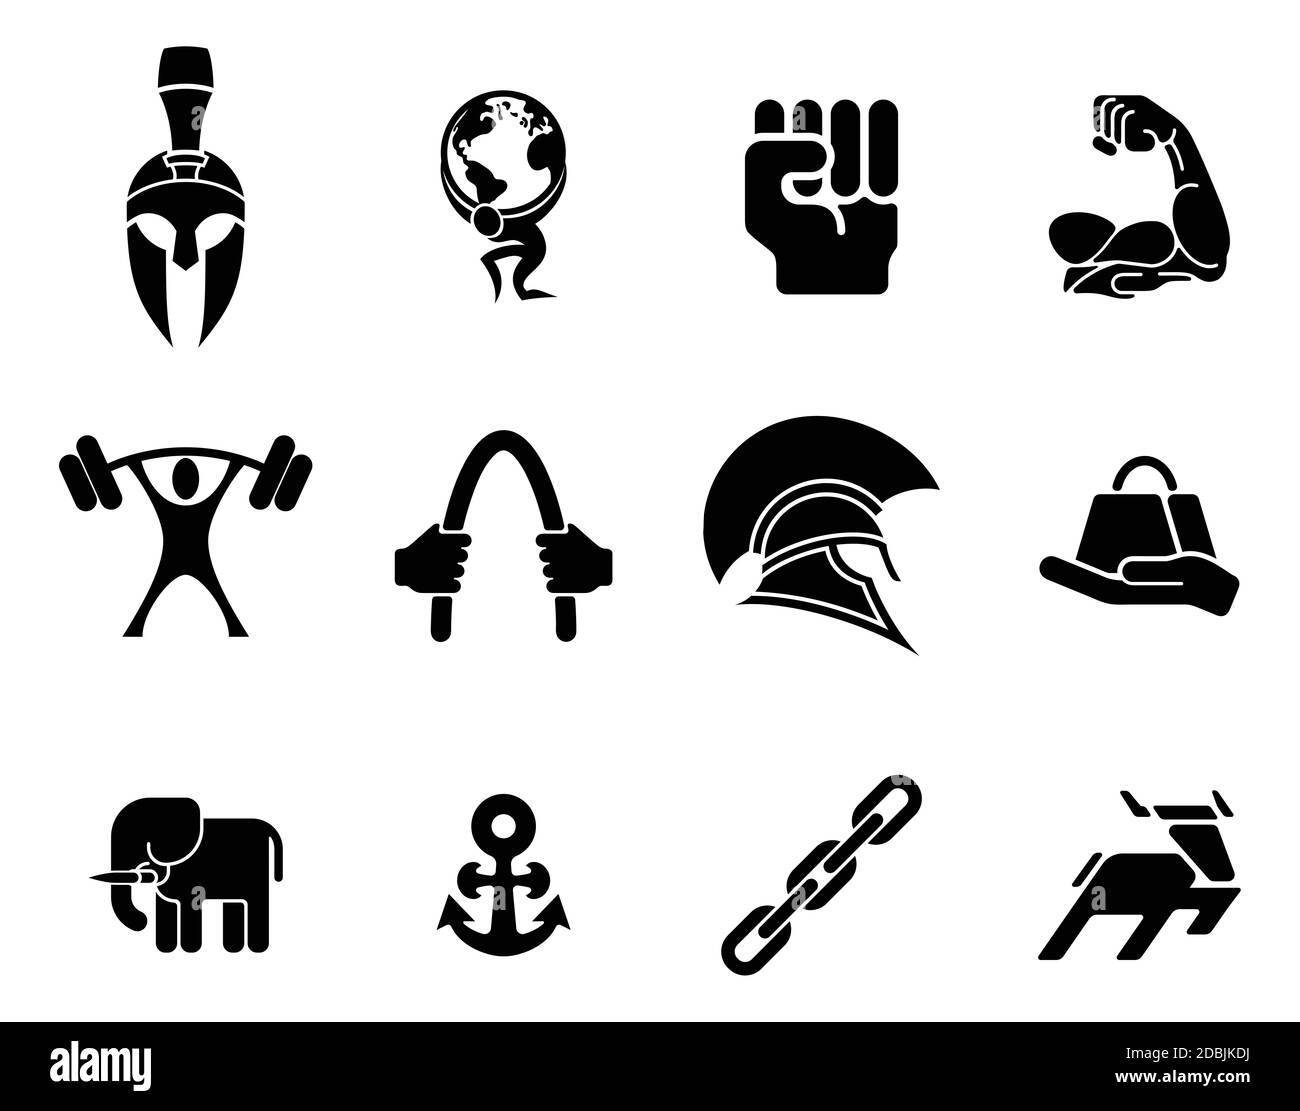 Conceptual strength icon set of icons relating to the concept of strength or being strong Stock Photo